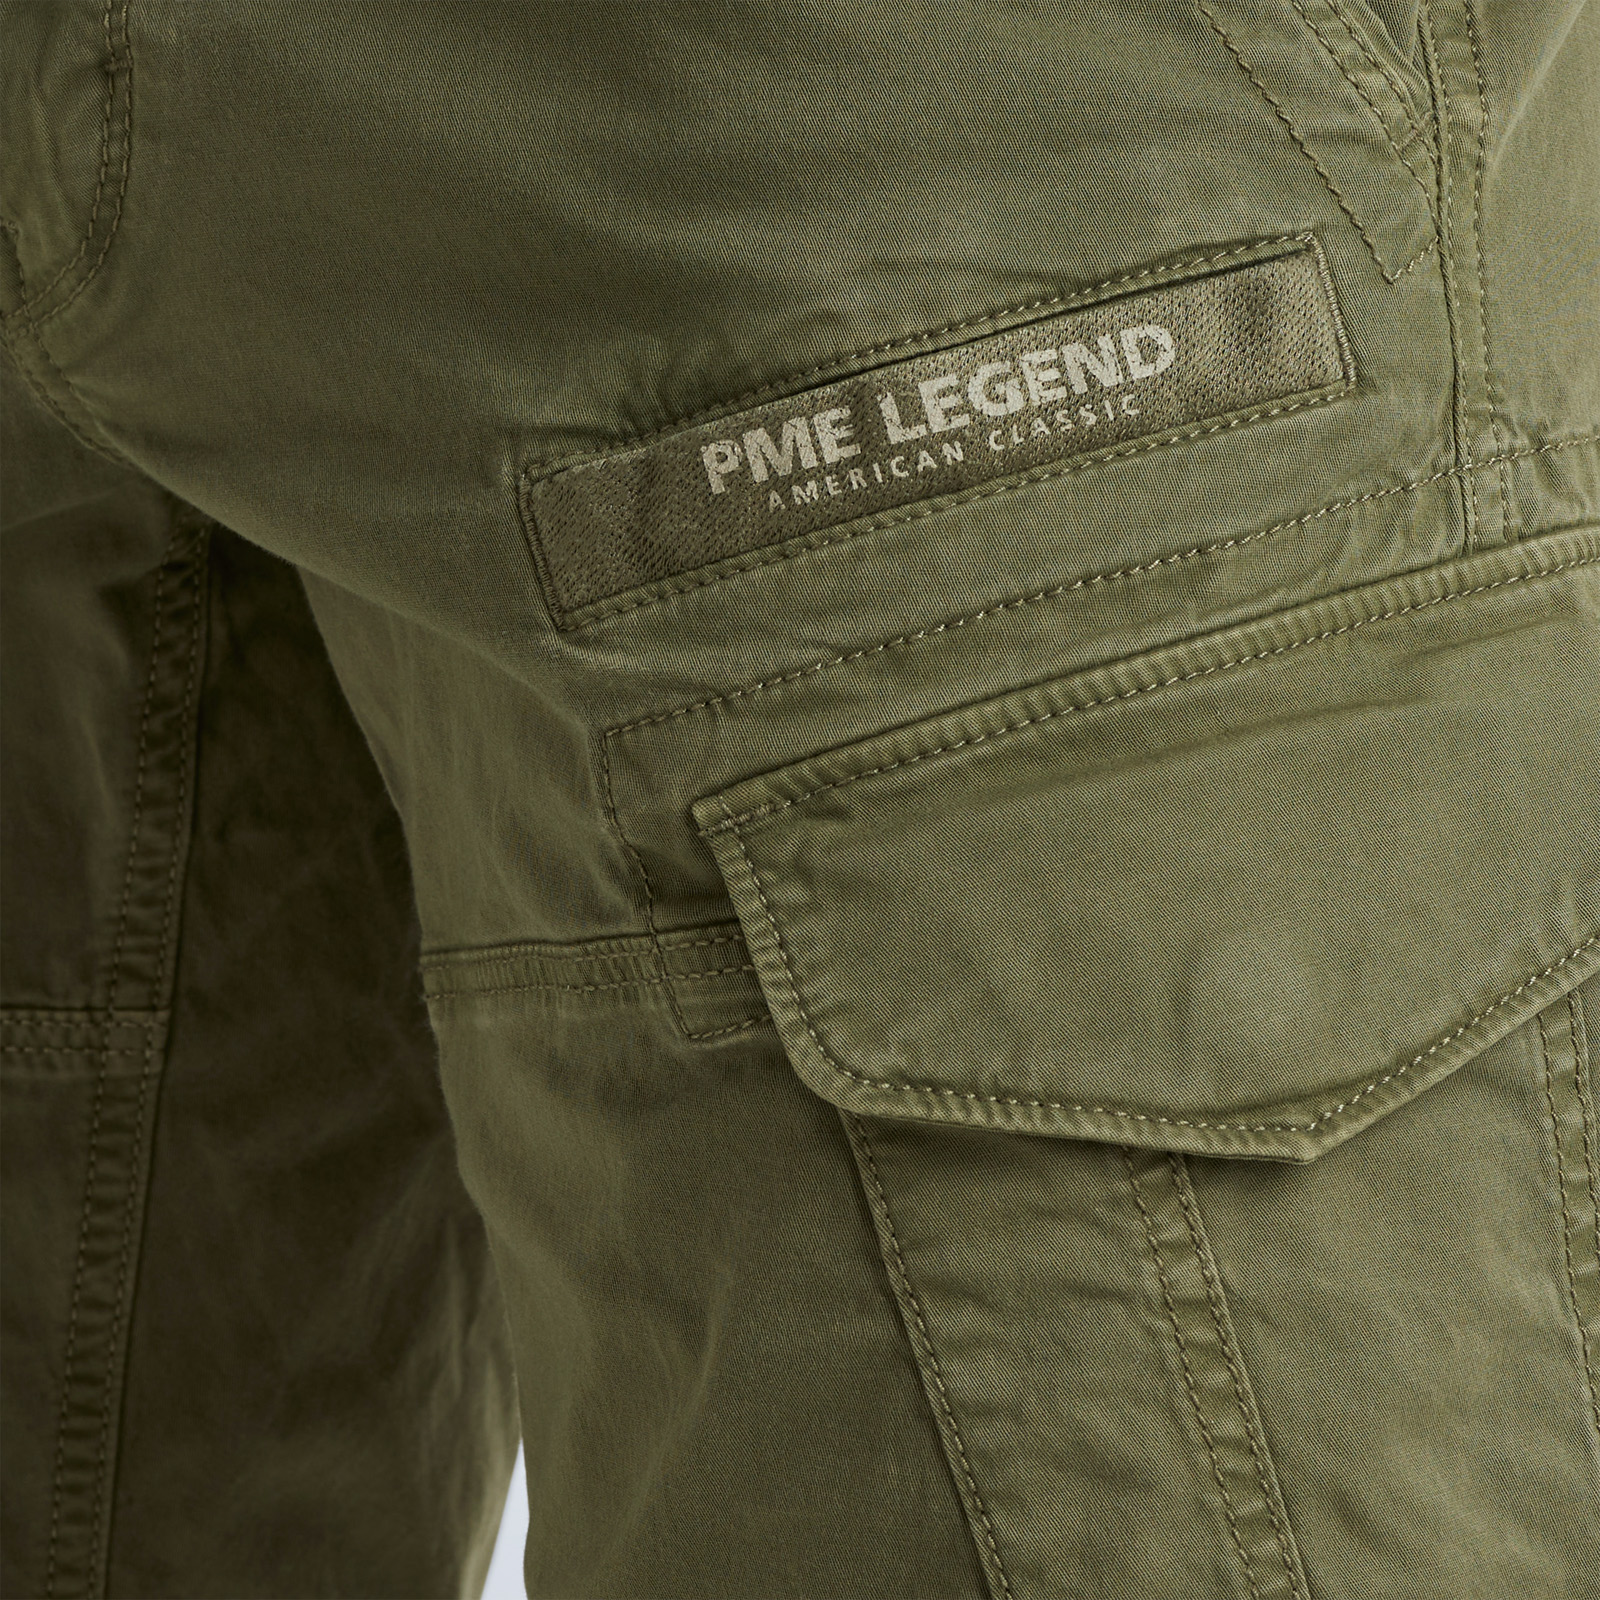 PME LEGEND | Nordrop Cargo Short | Free shipping and returns